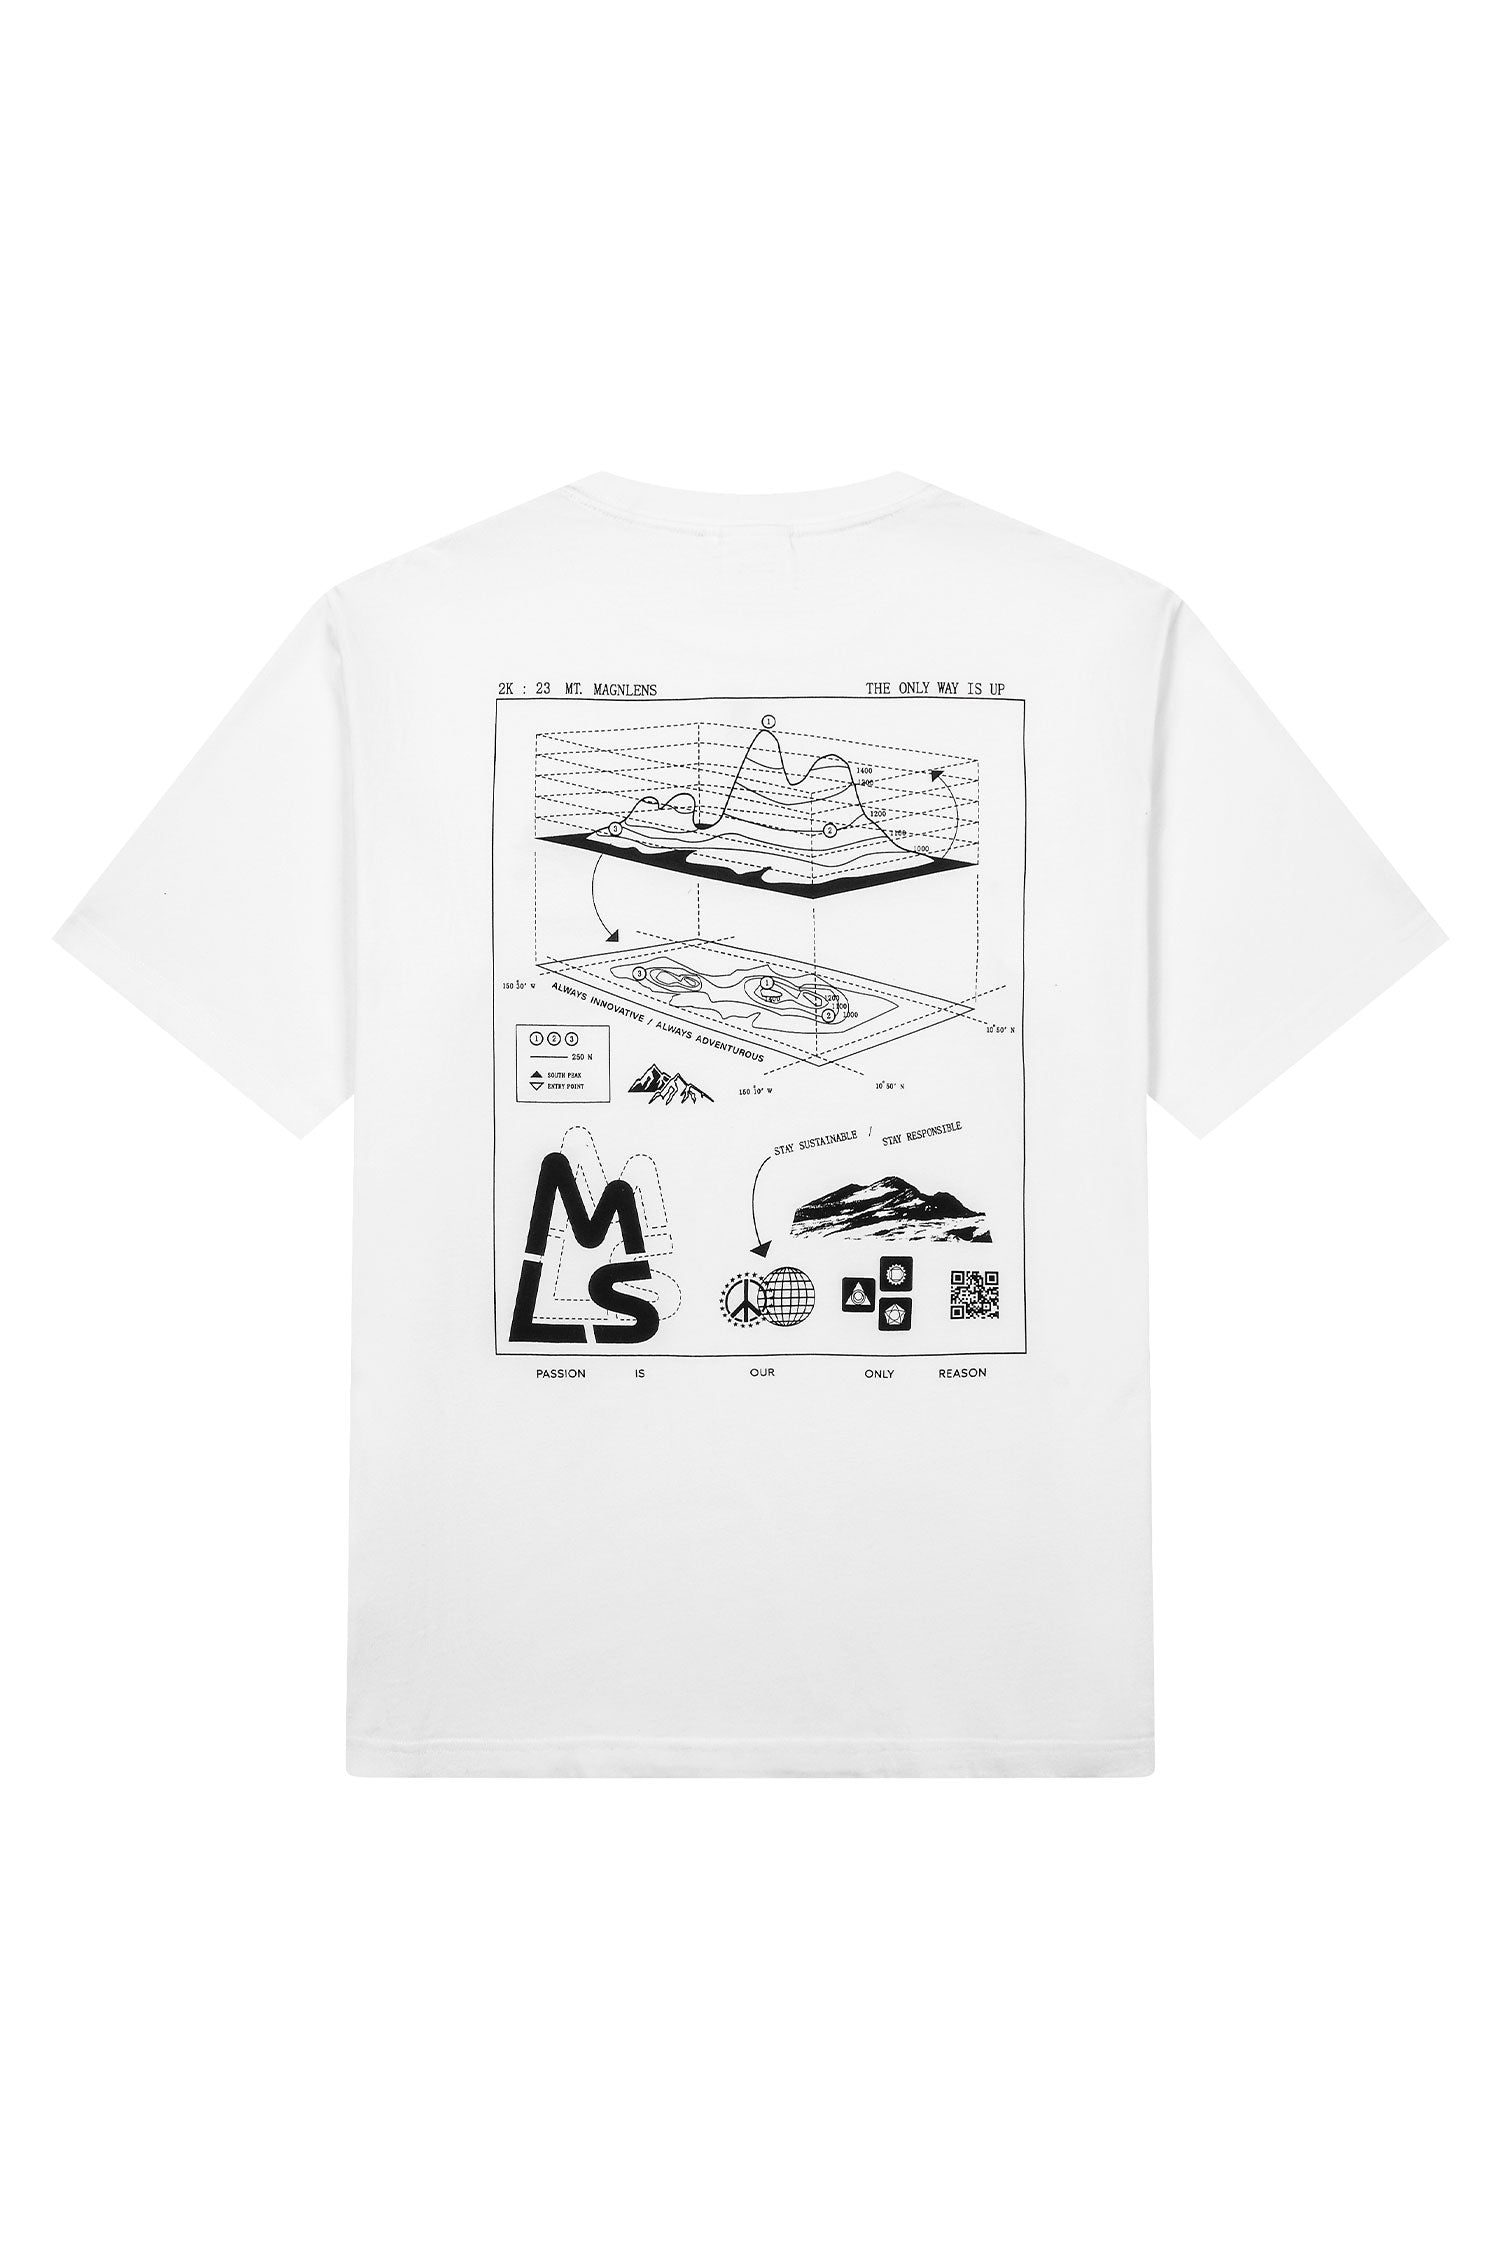 Stay Mountain Graphic Tee